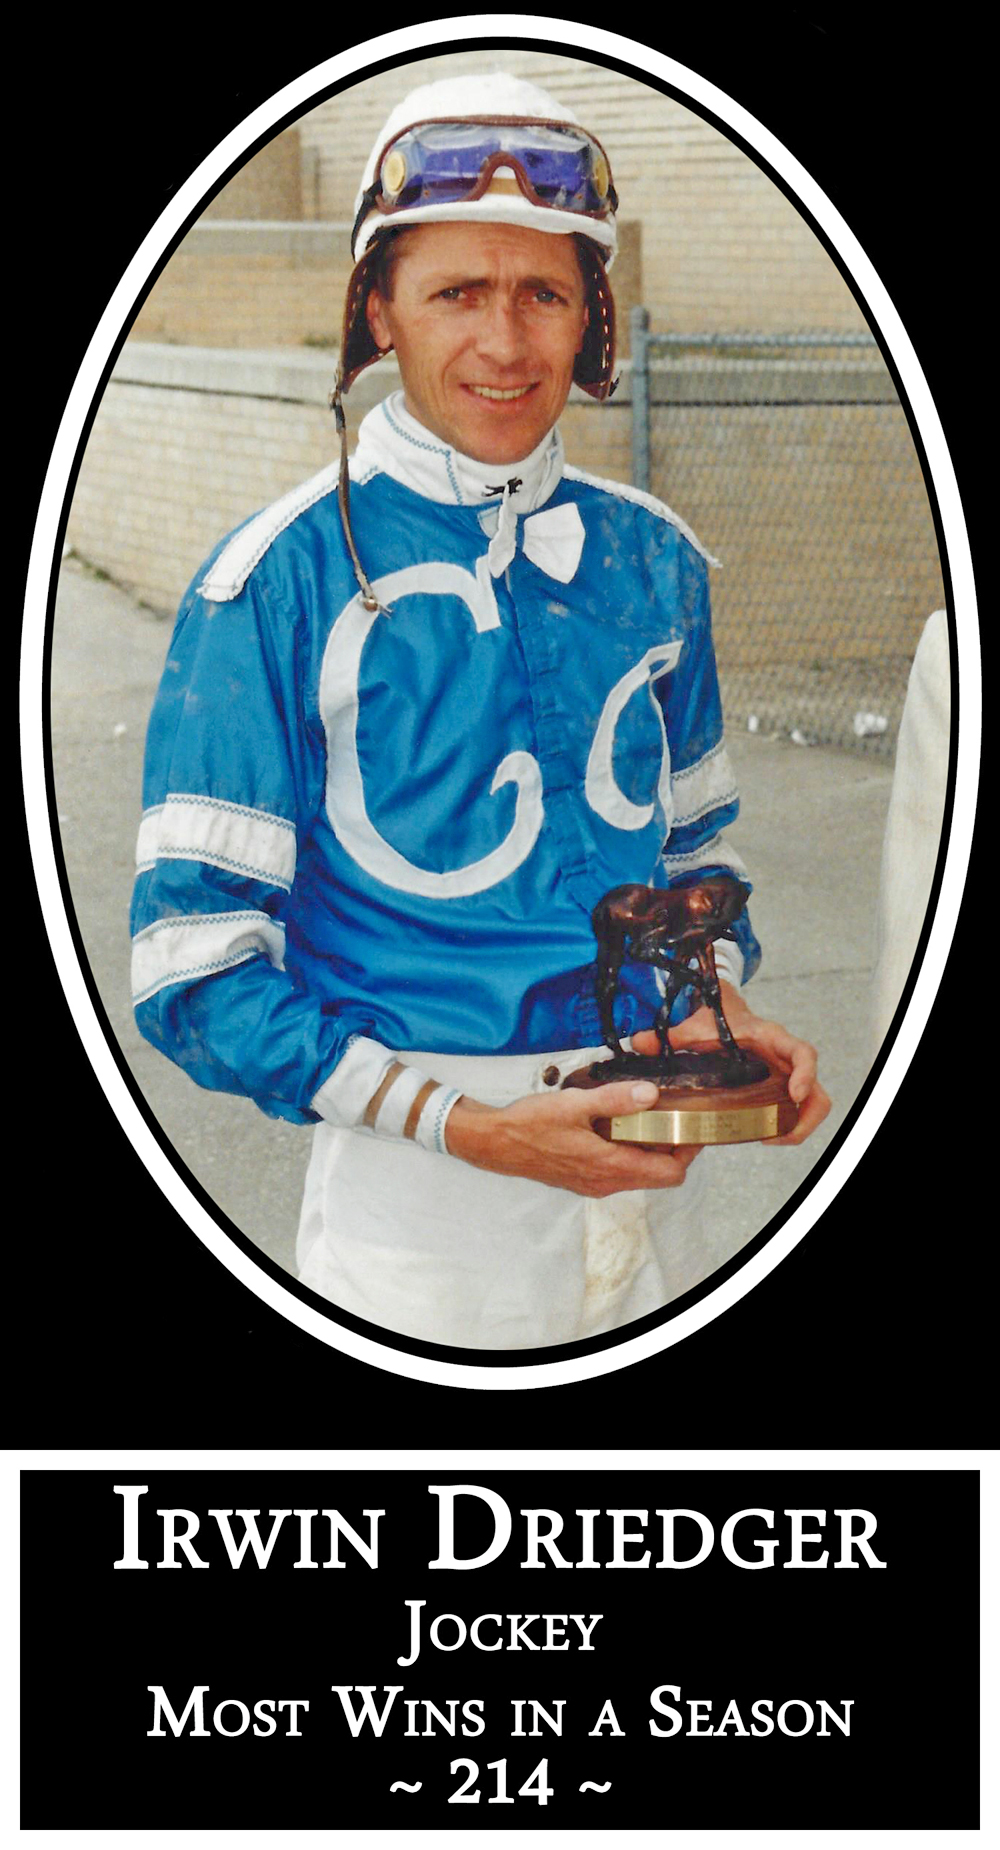 Irwins set a single-season record in 1981 that will never be broken at Assiniboia Downs with 214 wins.